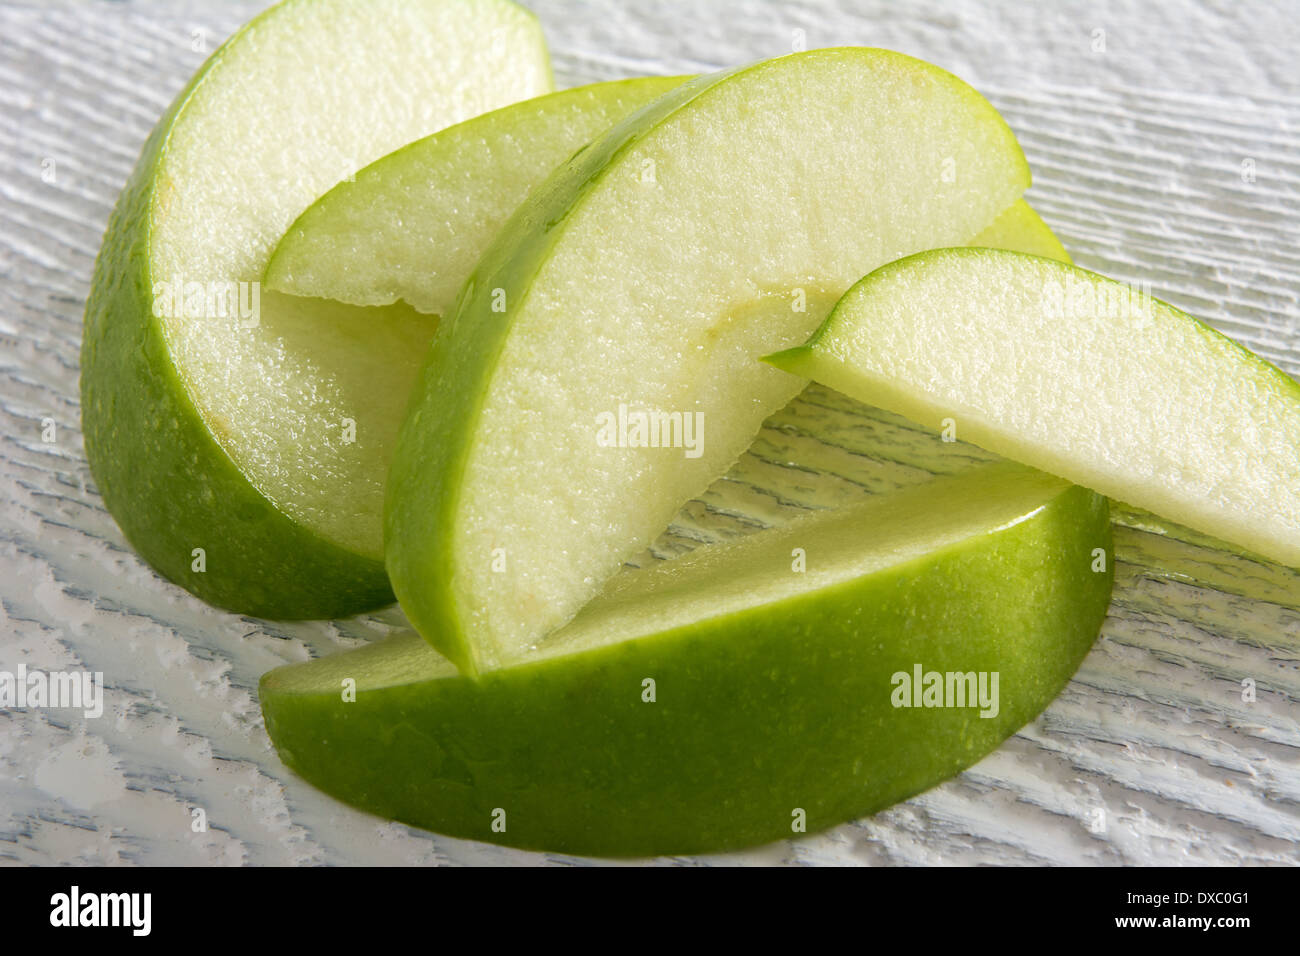 Green apple slices on white stained wood Stock Photo